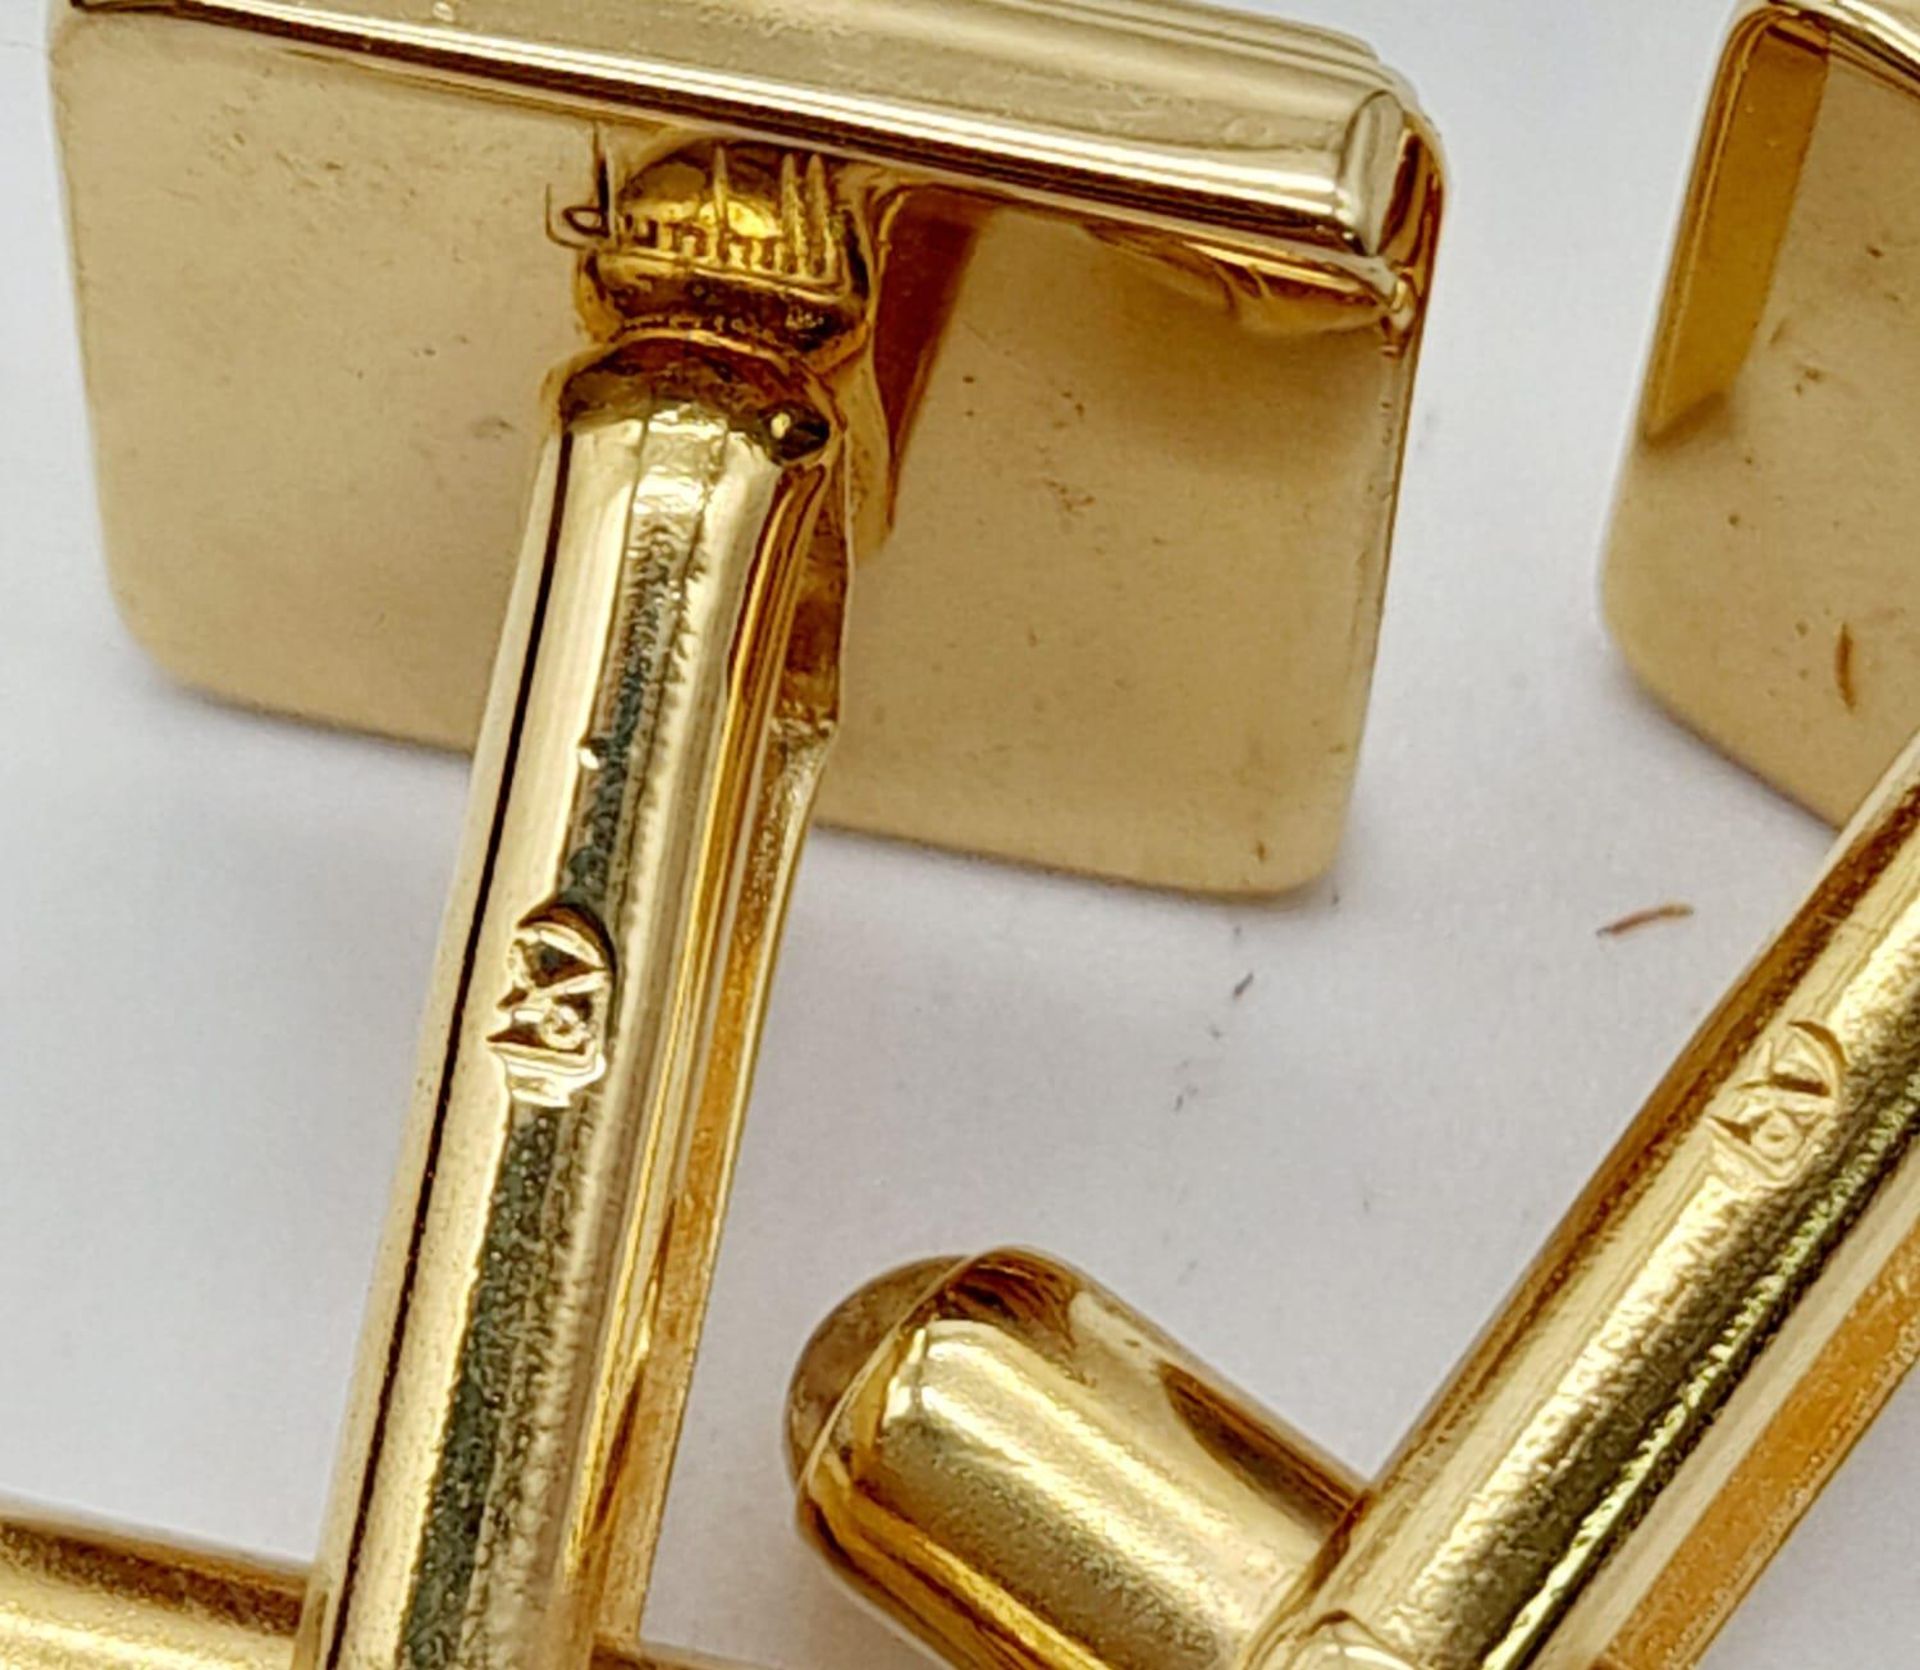 Pair of Square Yellow Gold Gilt Blue Panel Inset Cufflinks by Dunhill in their original presentation - Image 9 of 11